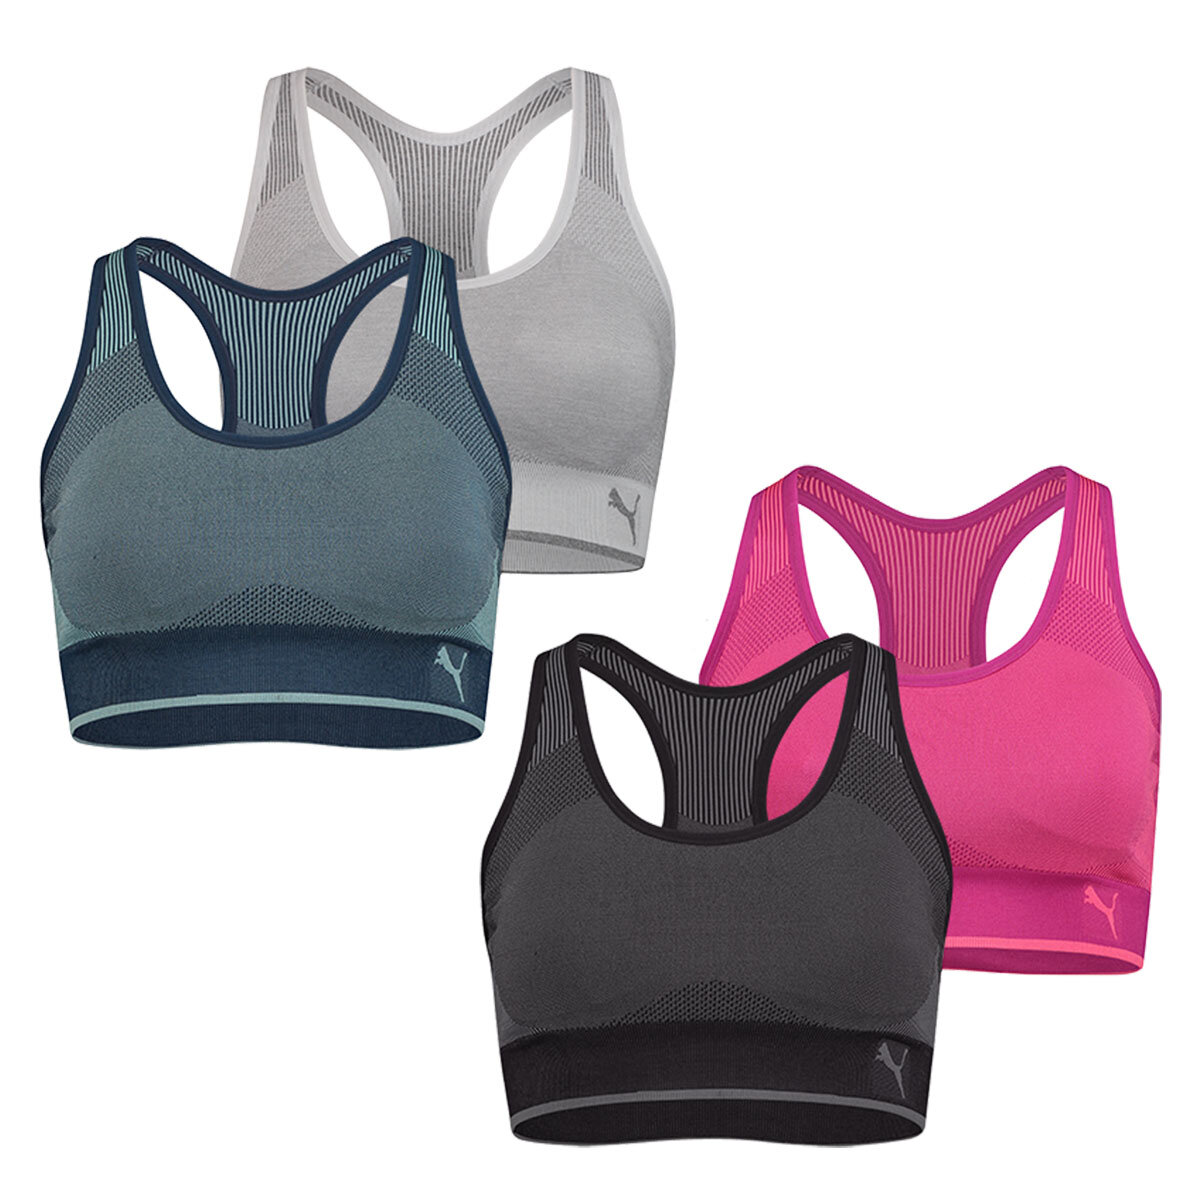 Puma Seamless Sports Bra, 2 Pack in 2 Colours and 4 sizes